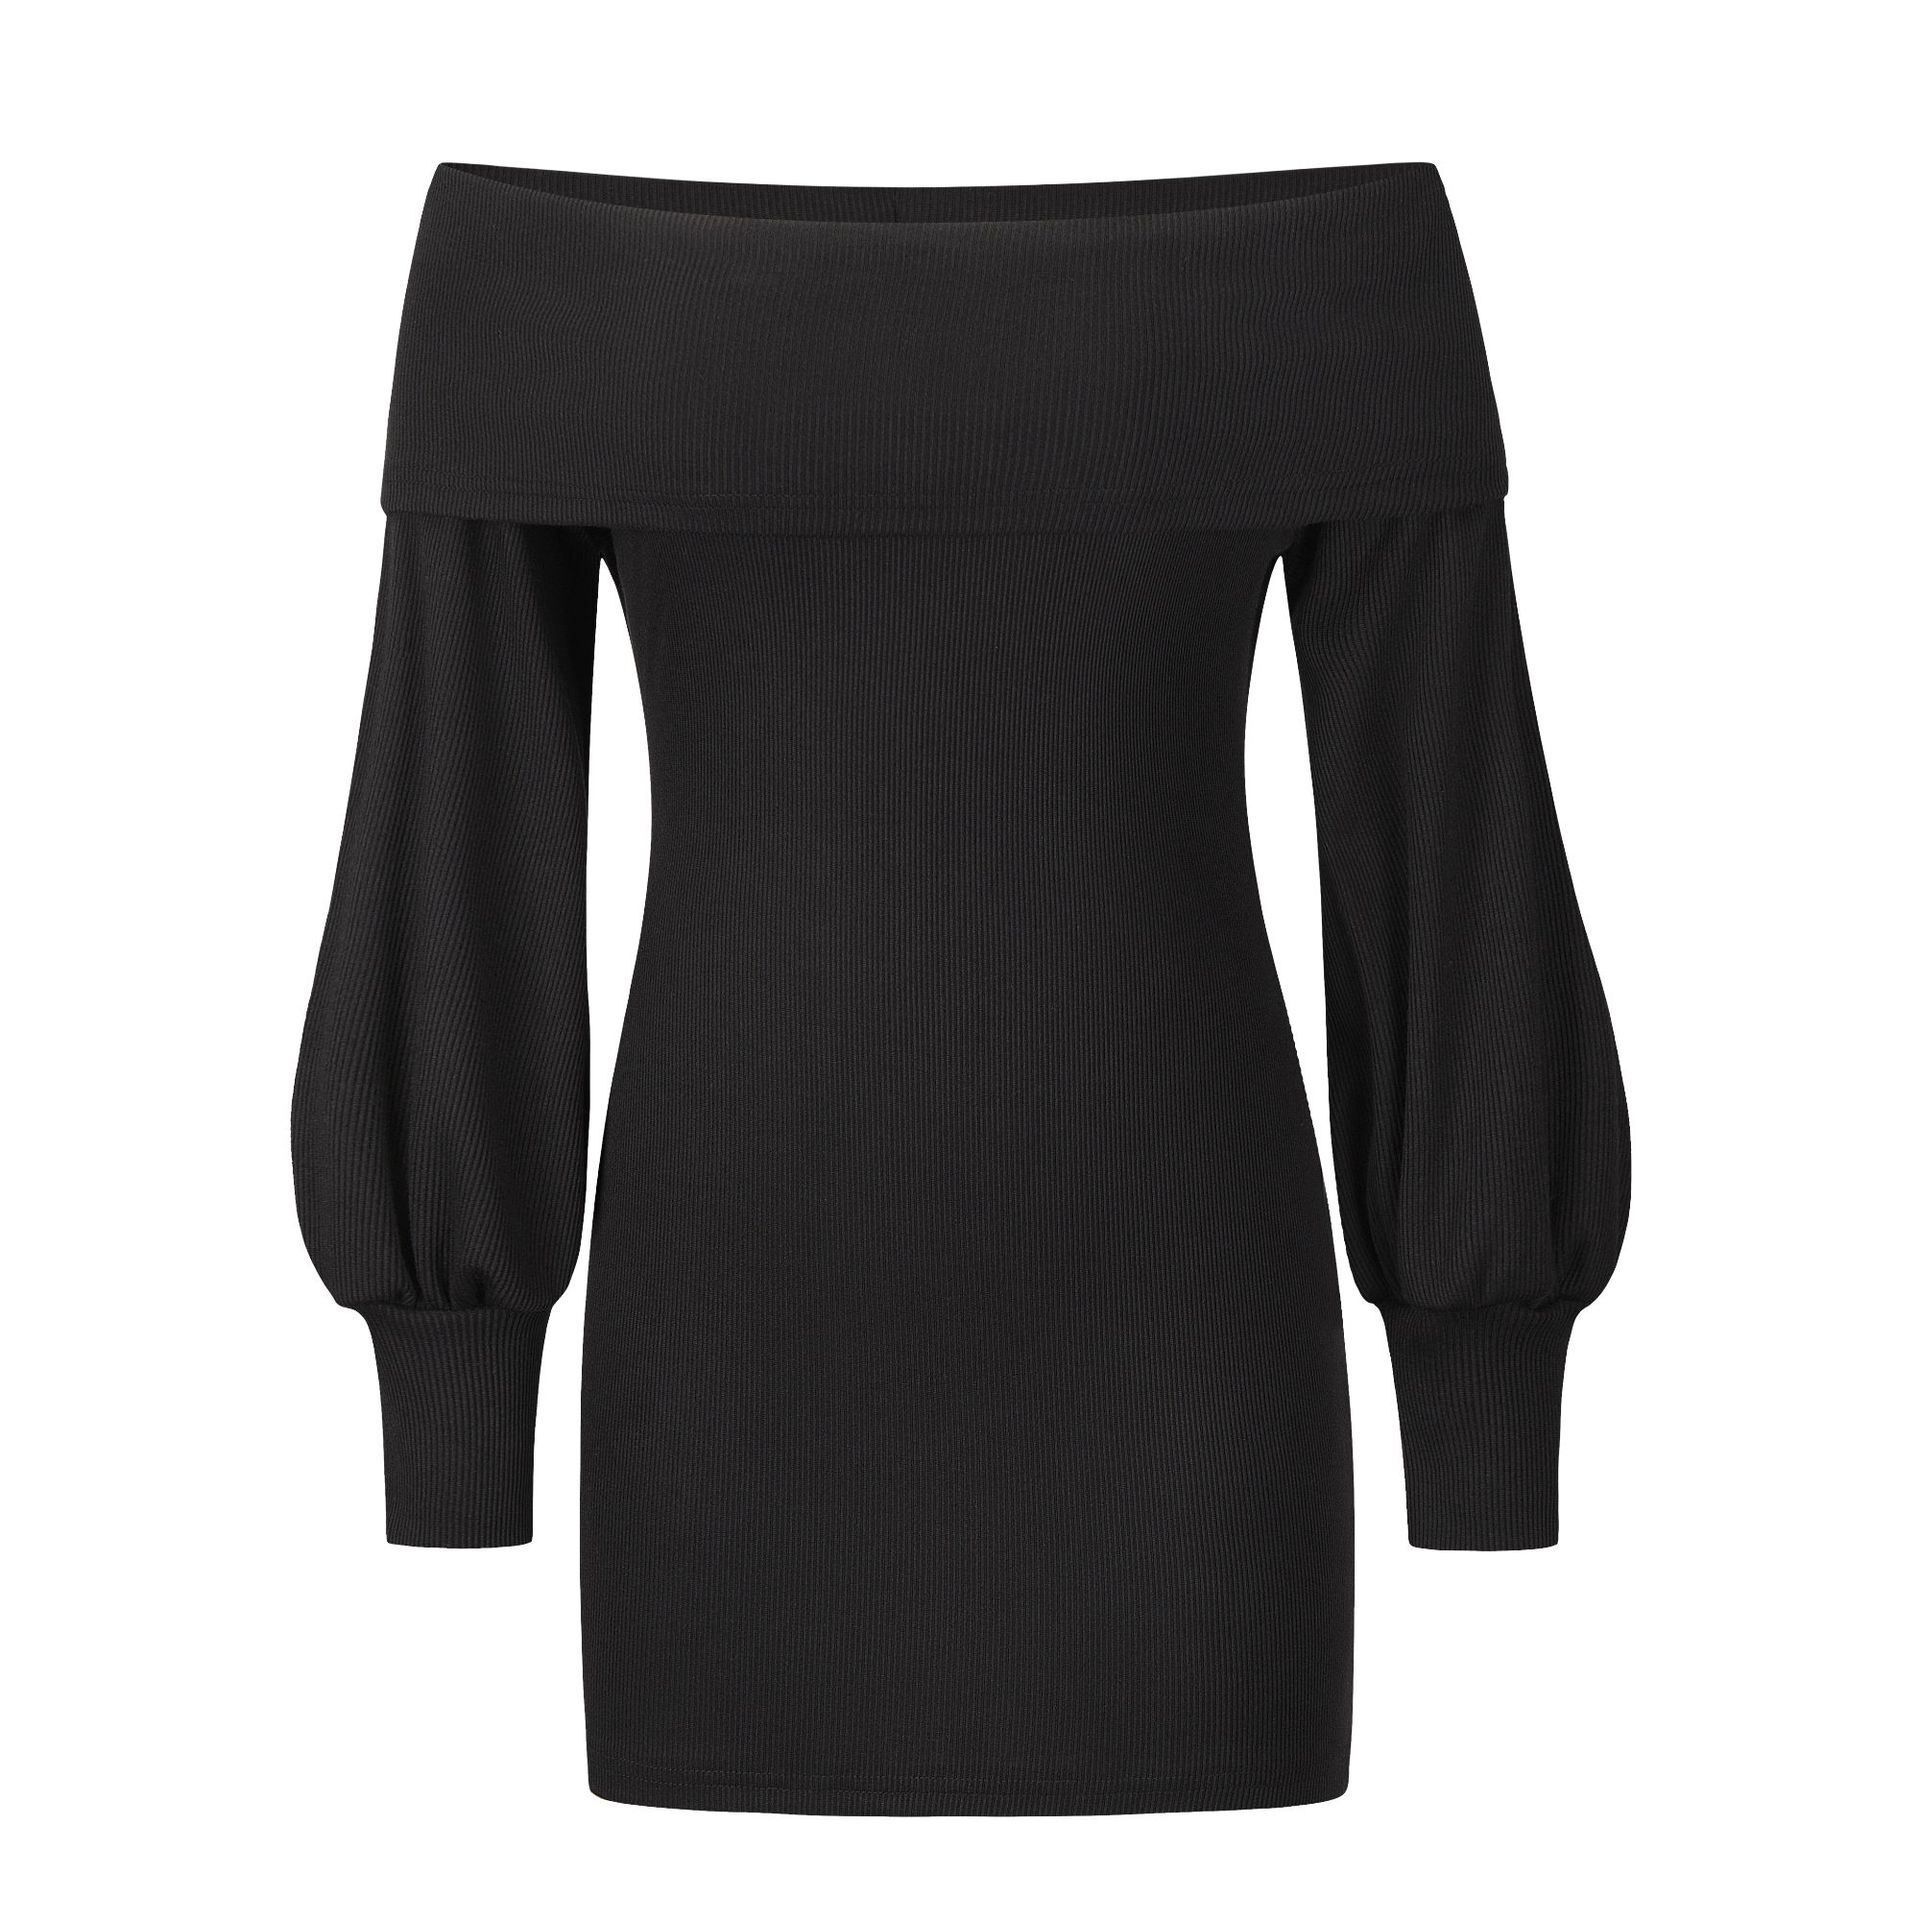 Sexy Hip Wrap Knit Skirt Off Shoulder Lantern Sleeve Dress New Rib Dress In Autumn And Winter F01F633